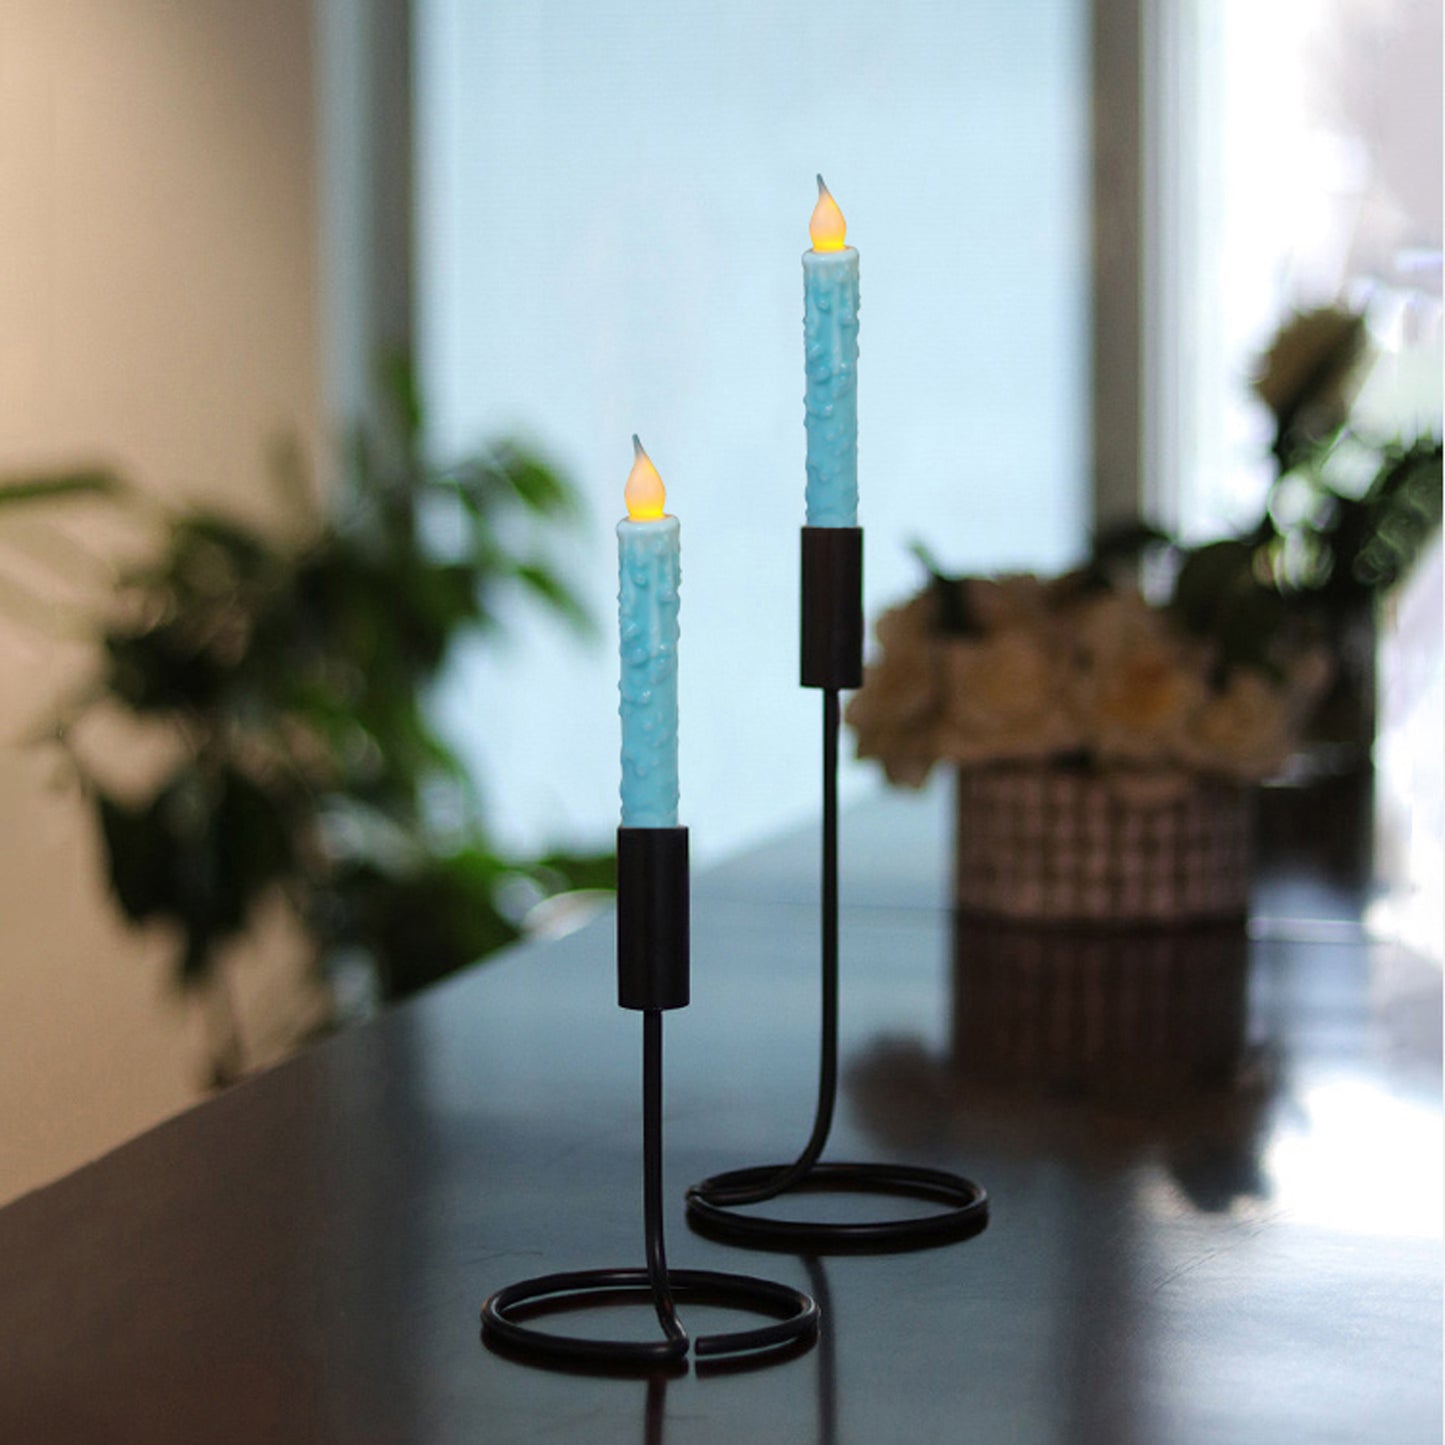 CVHOMEDECO. Real Wax Hand Dipped Battery Operated LED Timer Taper Candles Rustic Primitive Flameless Lights Decor, 6.75 Inch, Teal, 2 PCS in a Package